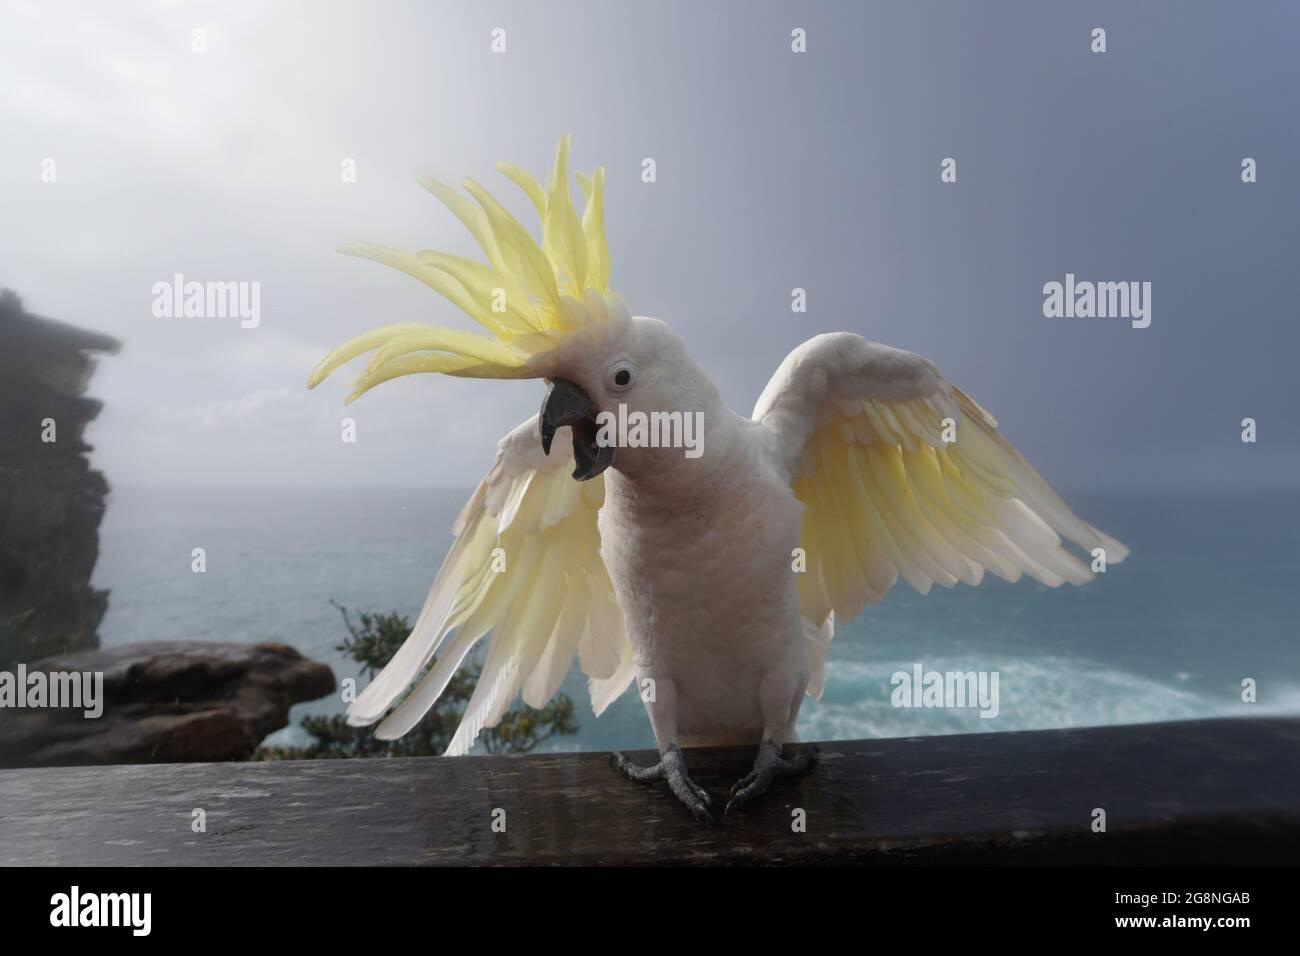 Close Up of an agitated Cockatoo with Raised Crest and Feathers flying in all Directions Stock Photo